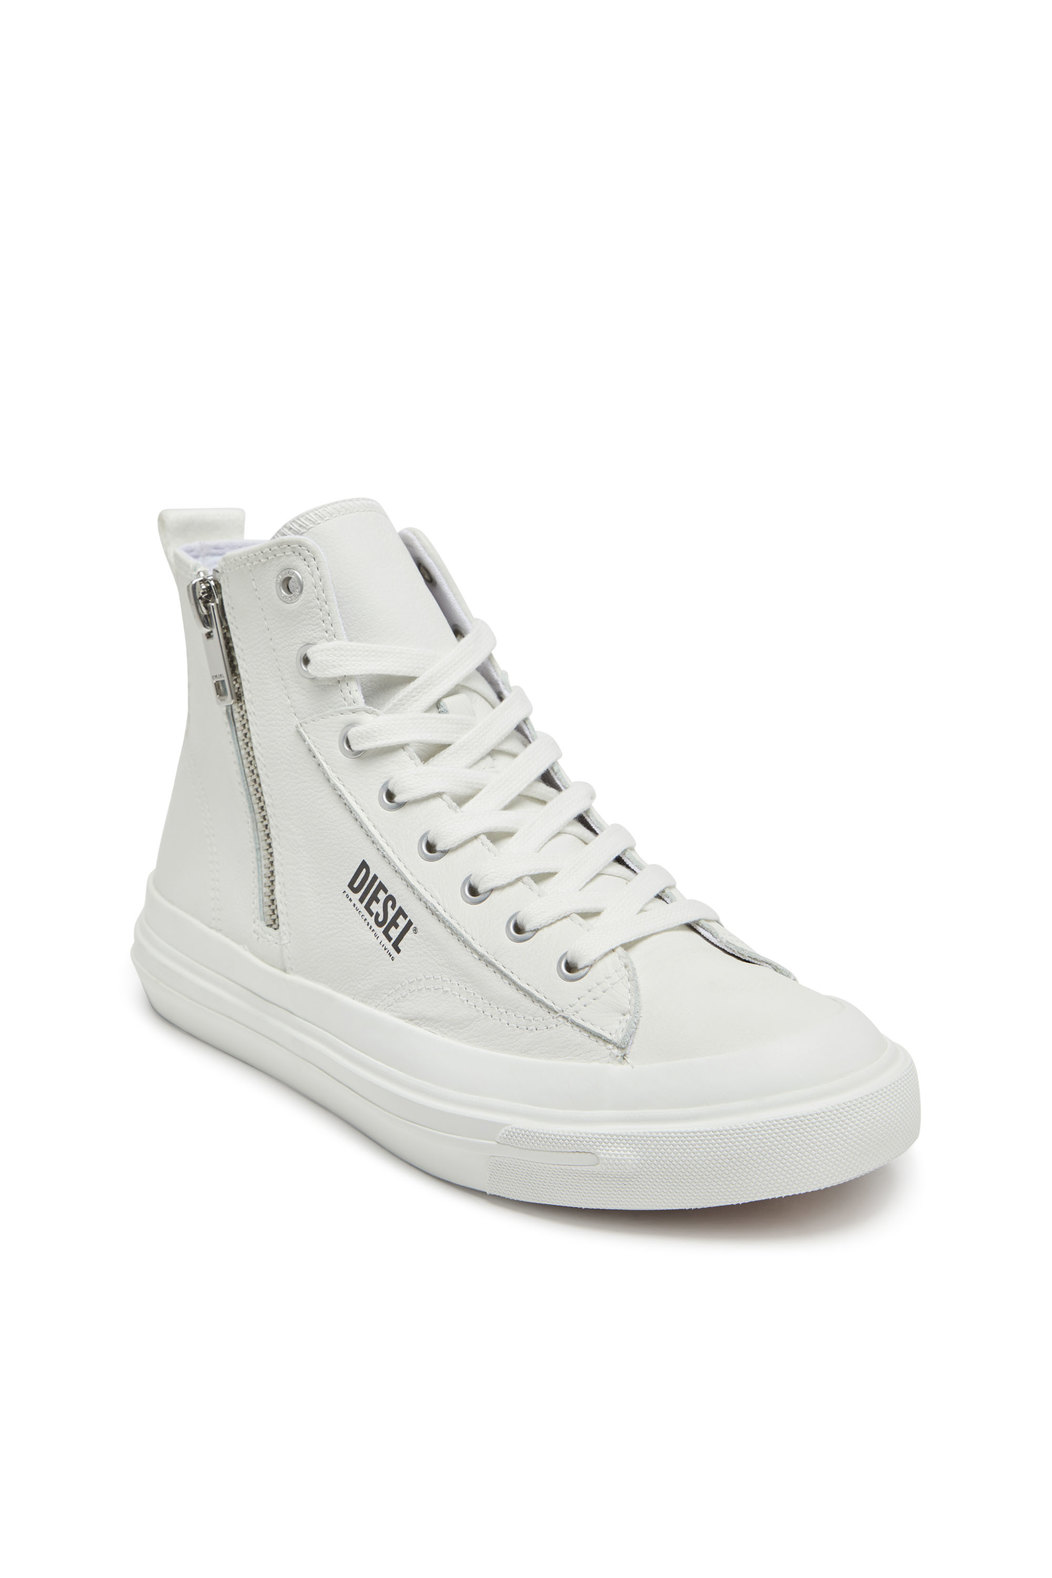 S-Athos Dv Mid - High-top sneakers with side zip